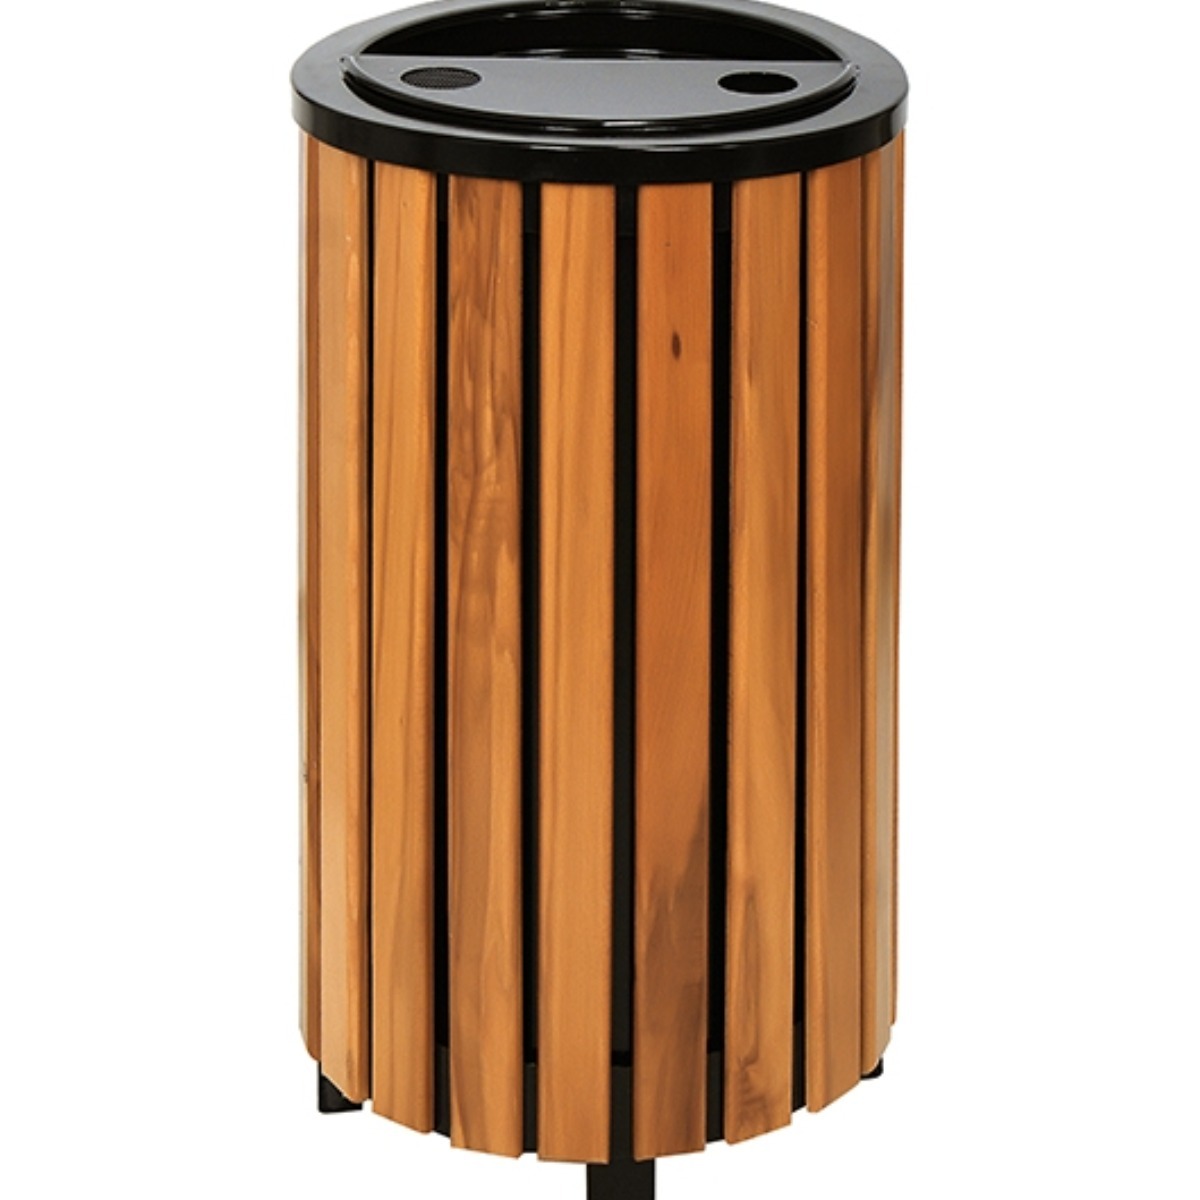 AB-510 Wood Open Space Trash Can